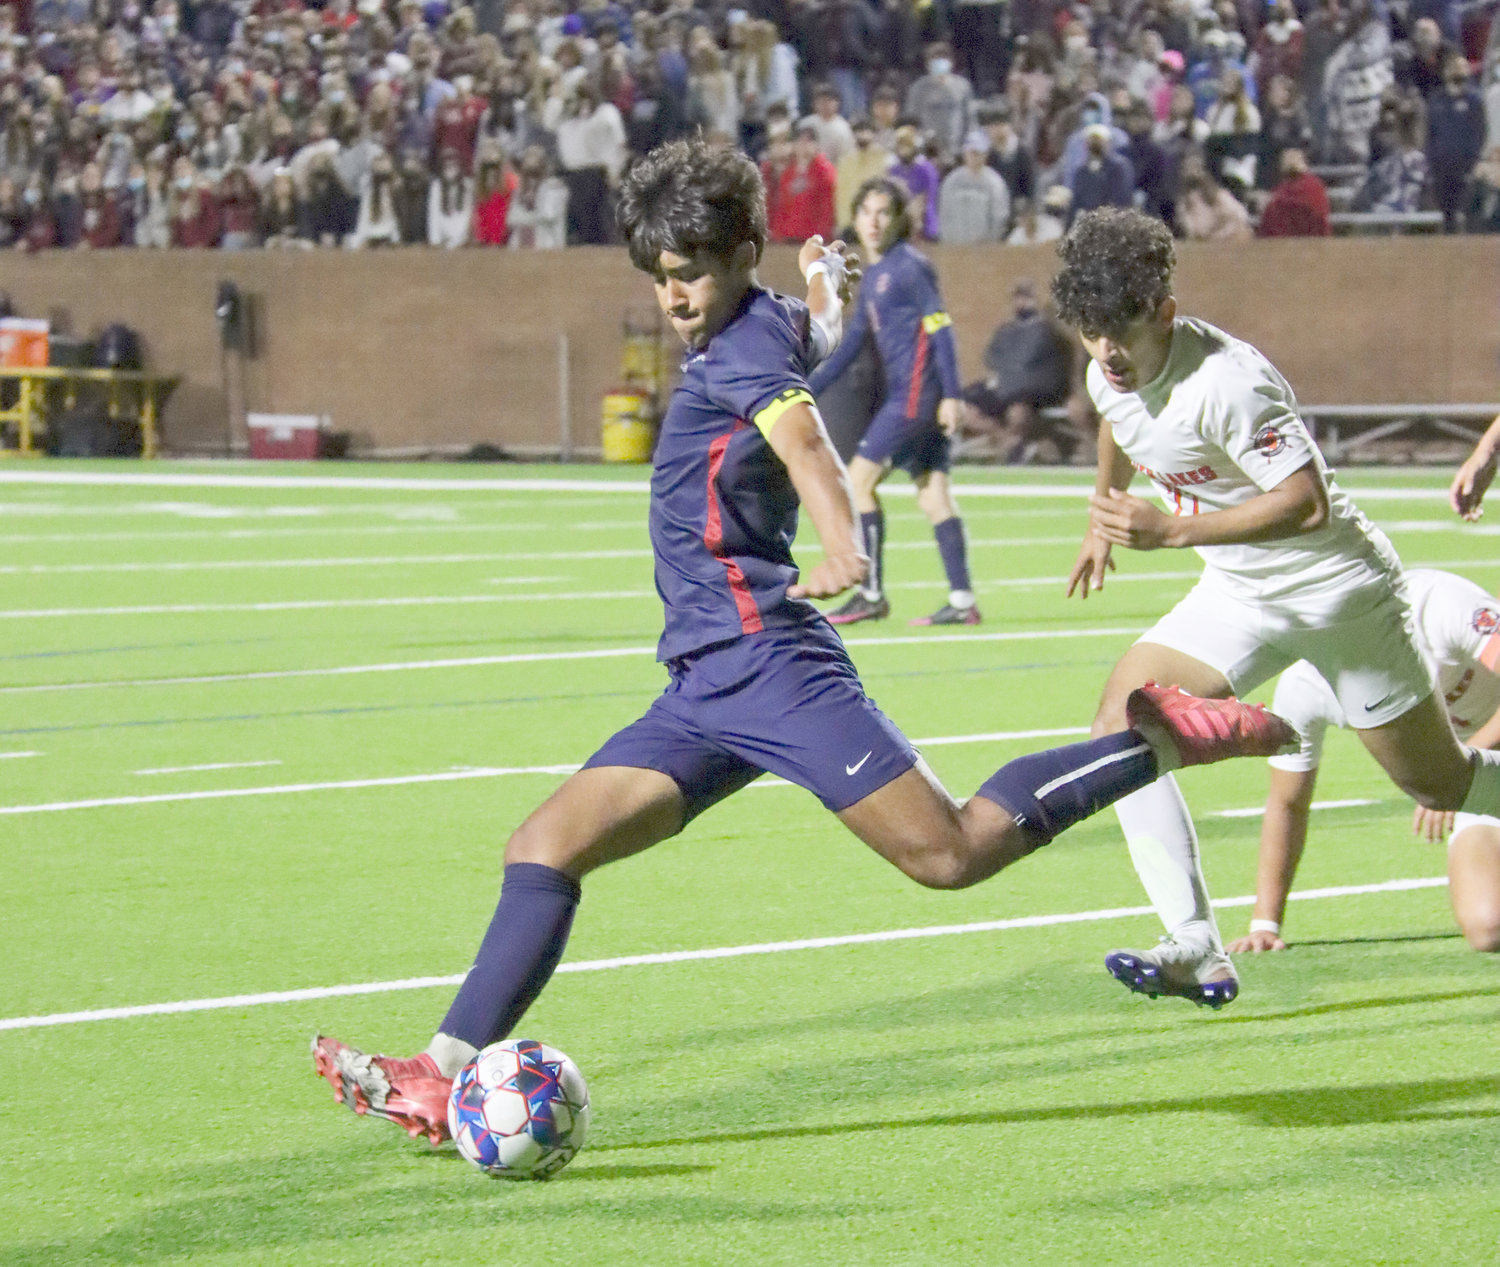 Tompkins junior Rafa Gonzales (8) prepares to kick the ball downfield during the Falcons’ Class 6A regional quarterfinal win over Seven Lakes on Friday, April 2, at Rhodes Stadium.